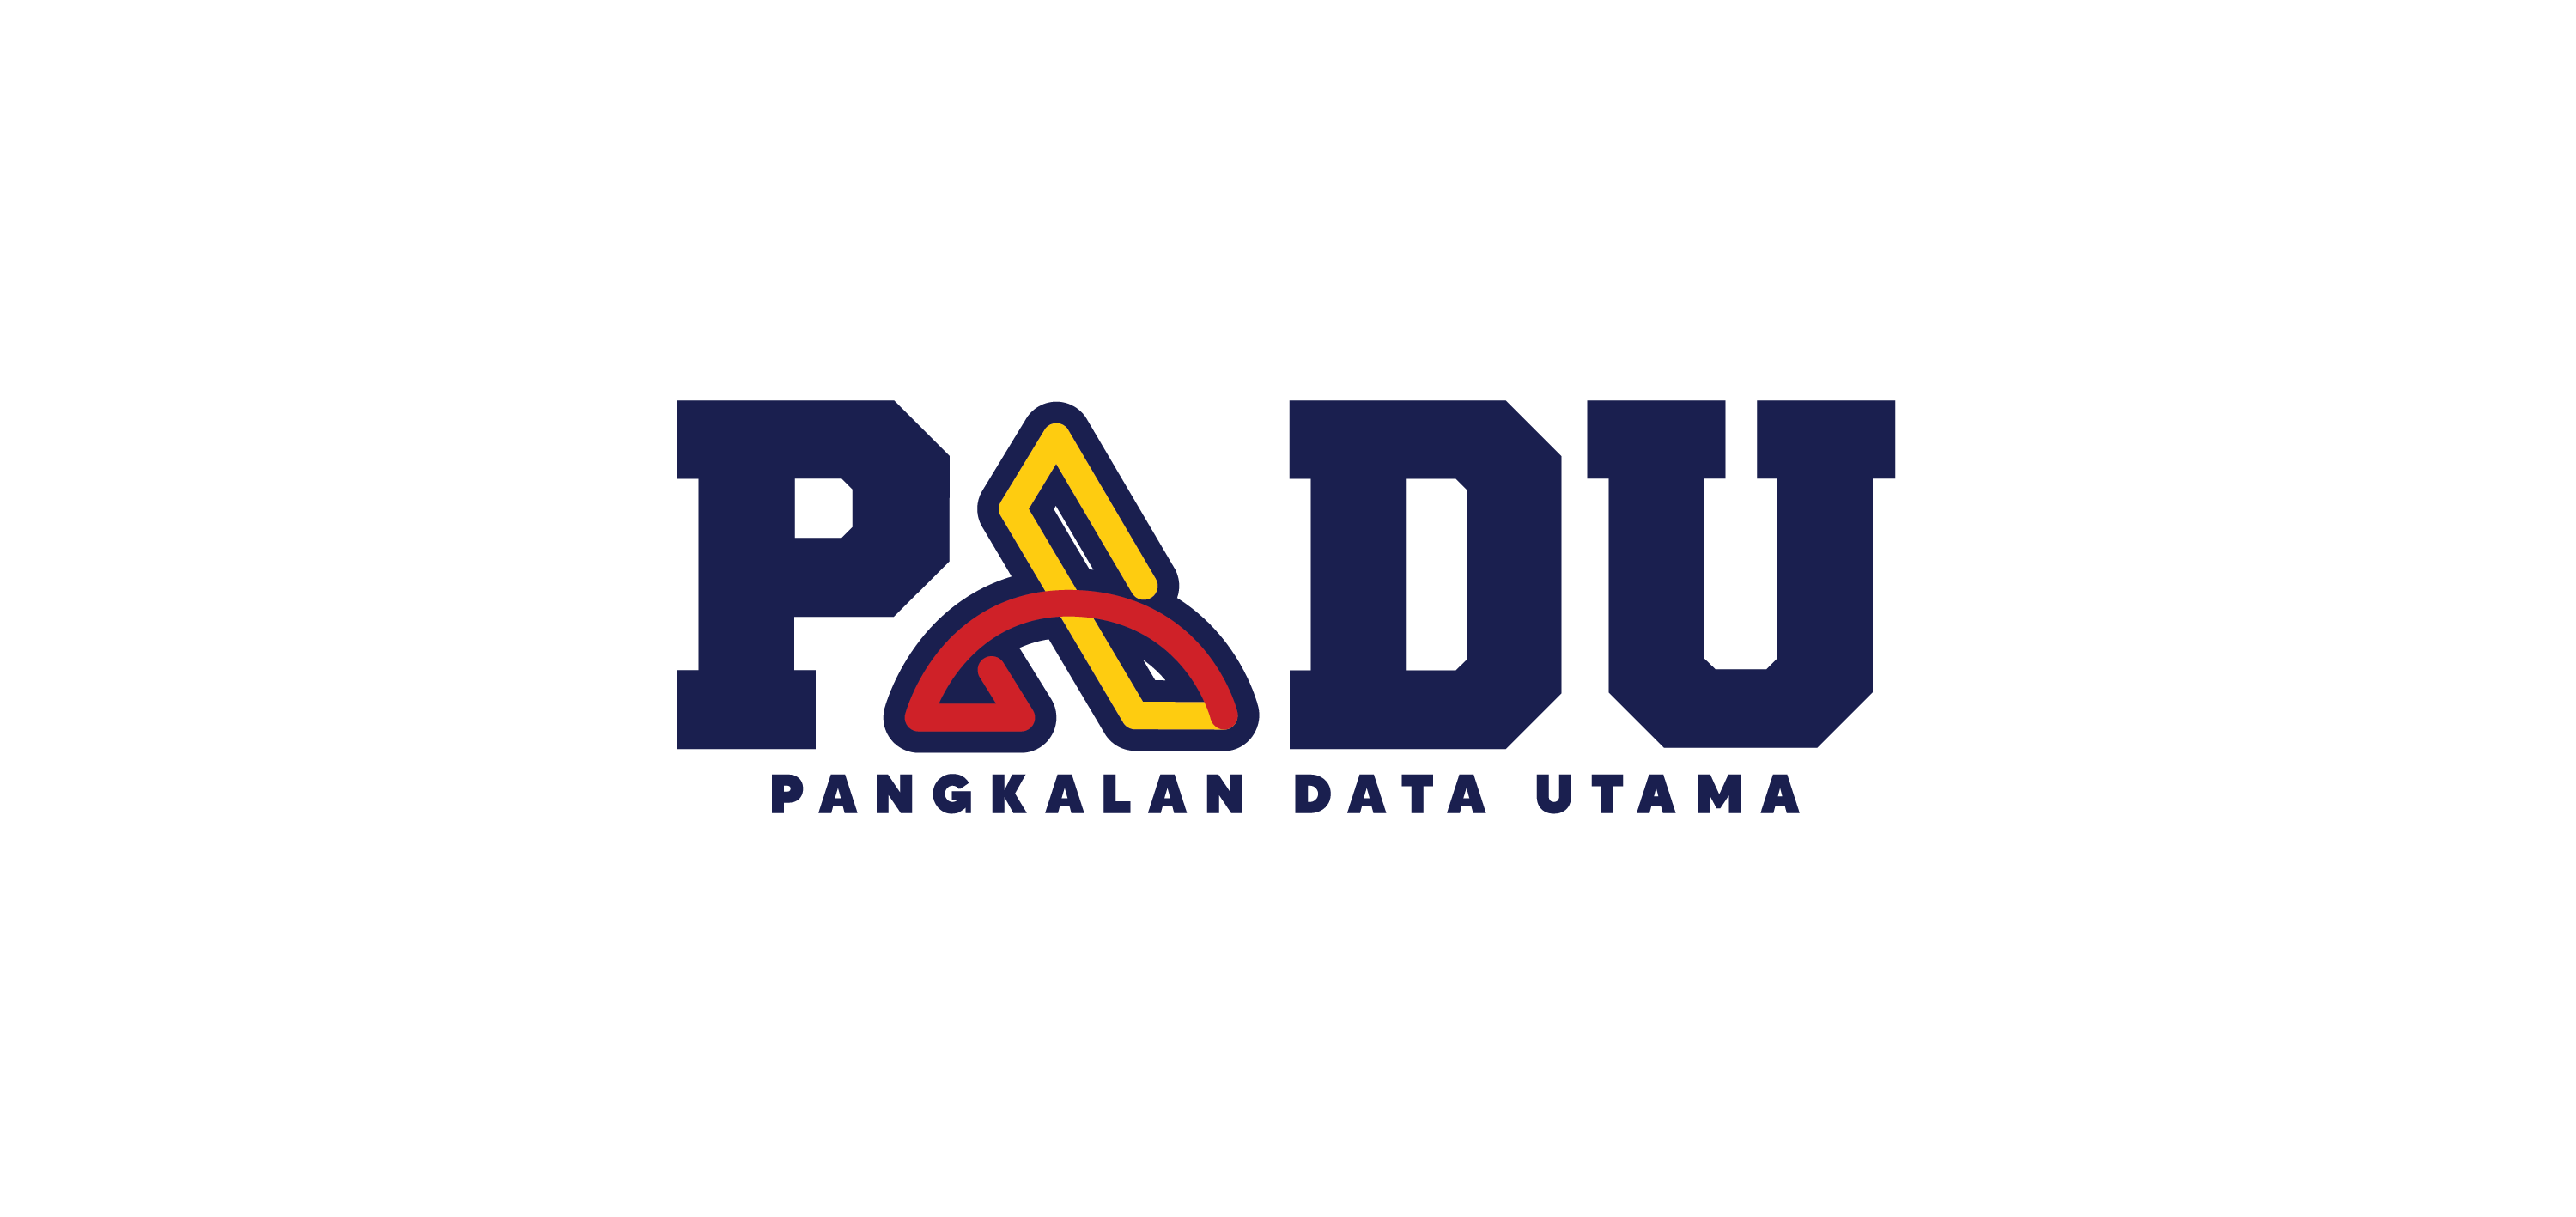 UPDATING OF PERSONAL INFORMATION FOR ACADEMIC STAFF AND NON-ACADEMIC STAFF (MALAYSIAN AND PERMANENT RESIDENT) OF (IIUM) IN THE CENTRAL DATABASE HUB (PADU)